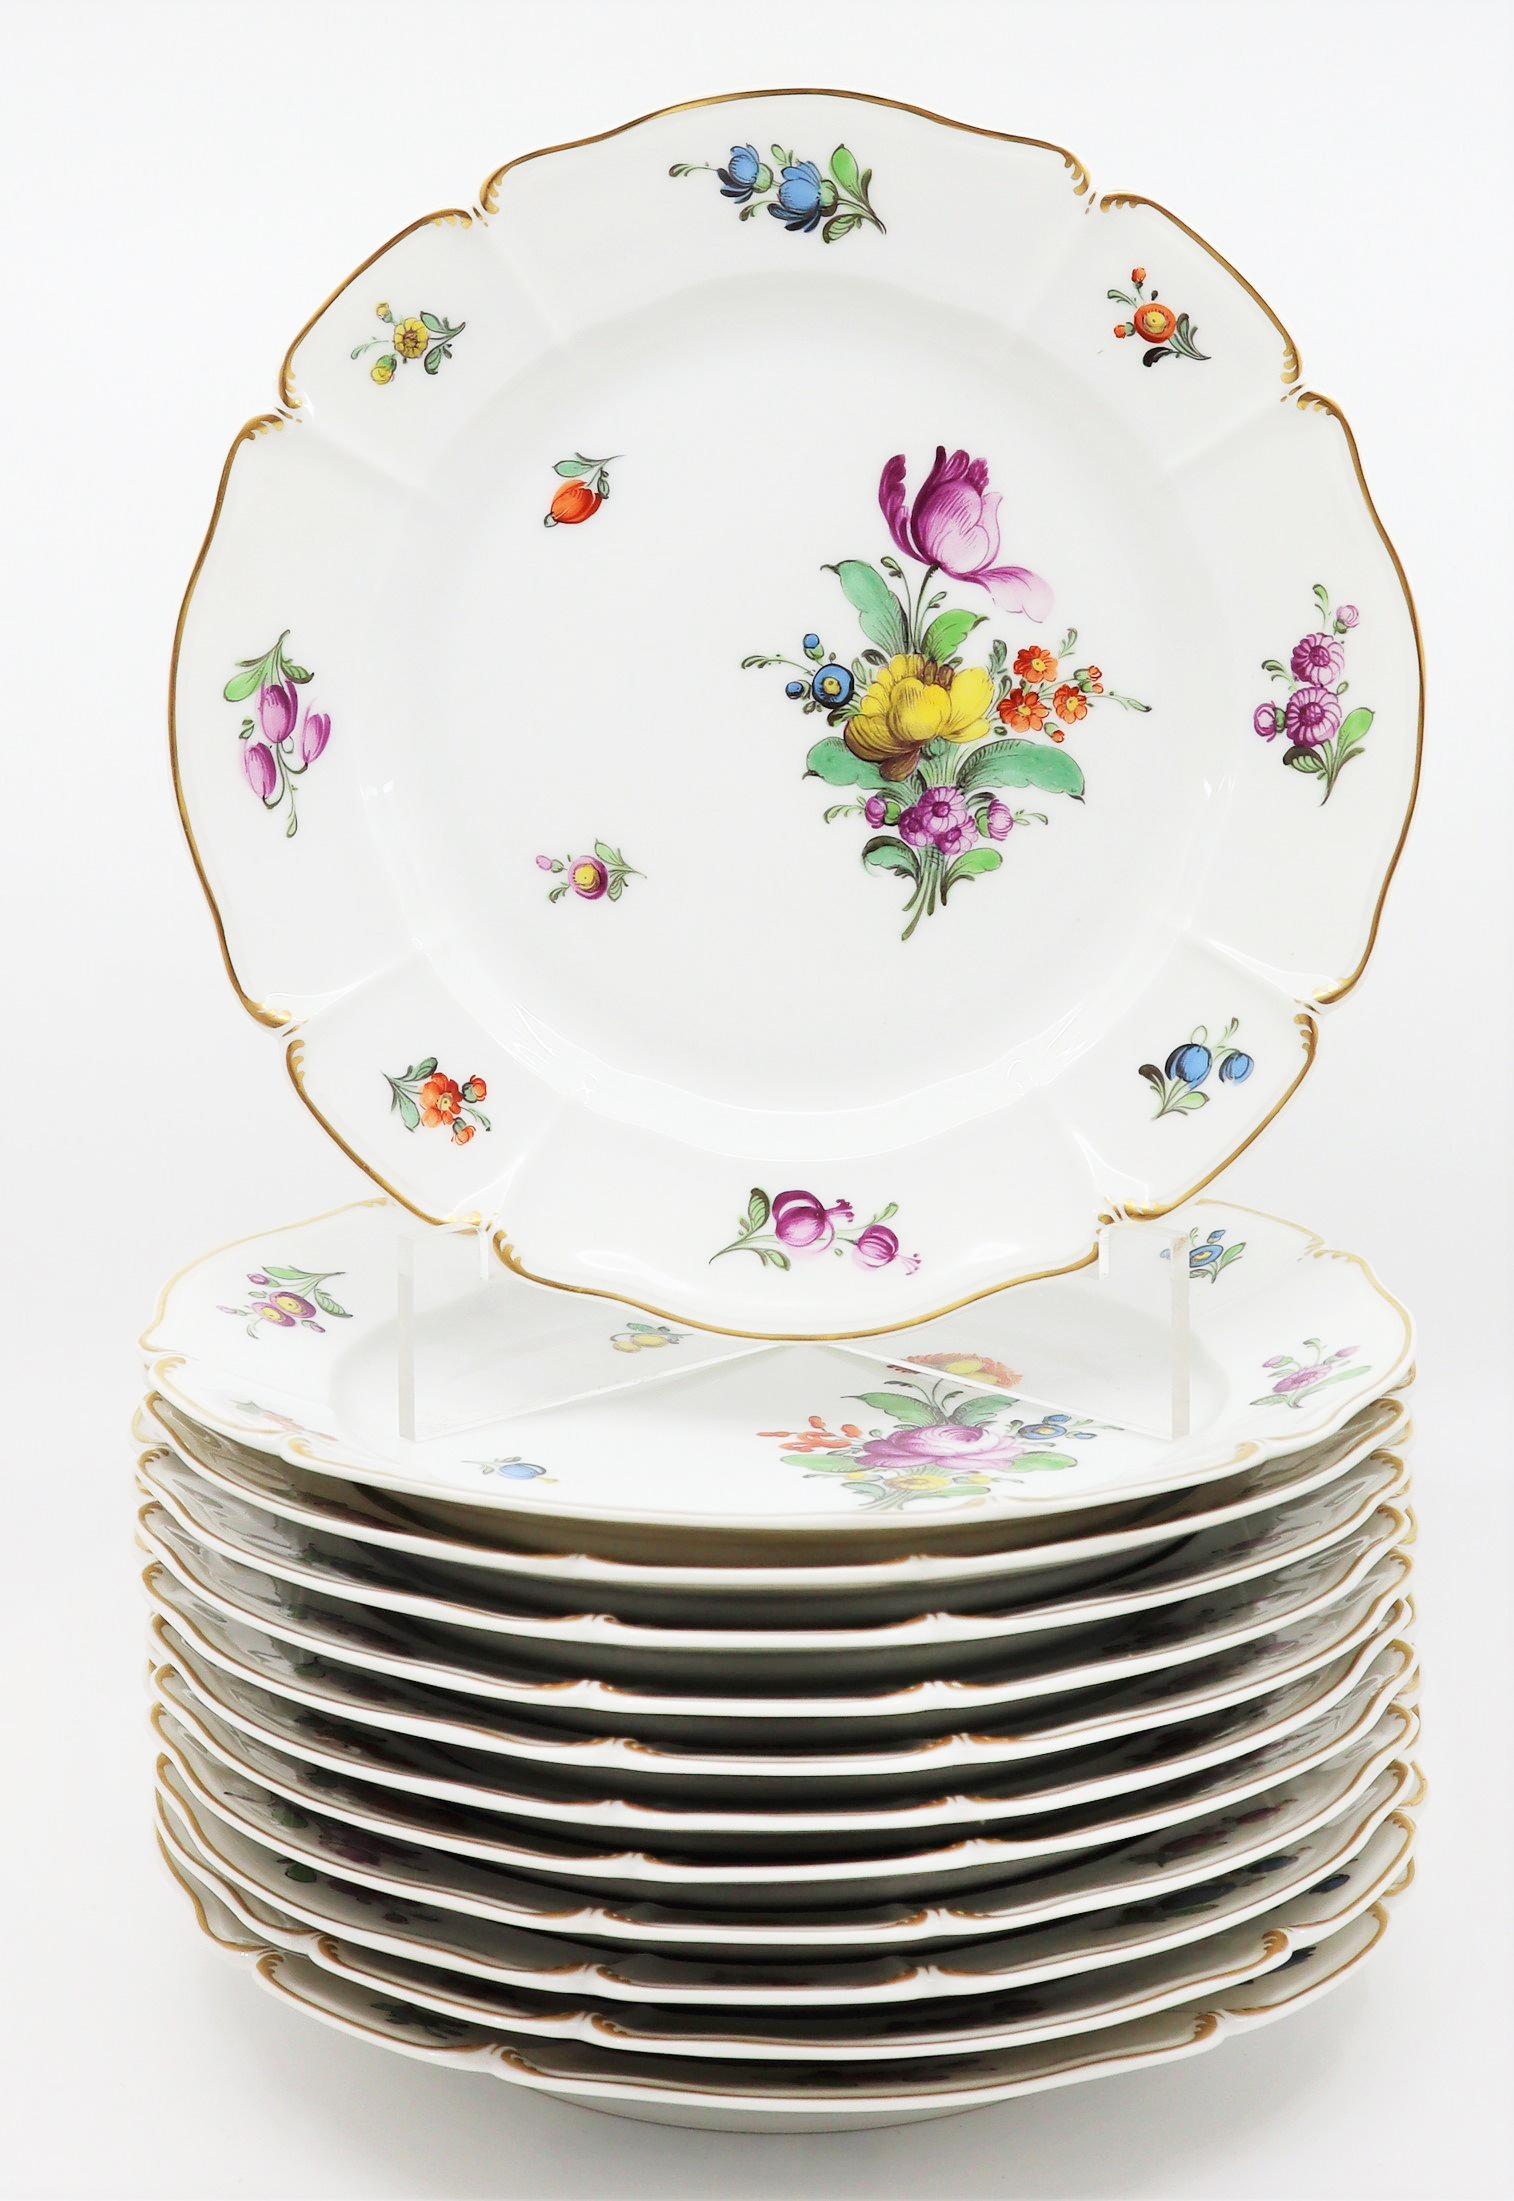 Dinner Service, 19th Century Porcelain, German, Hand Painted with Flowers Décor 11